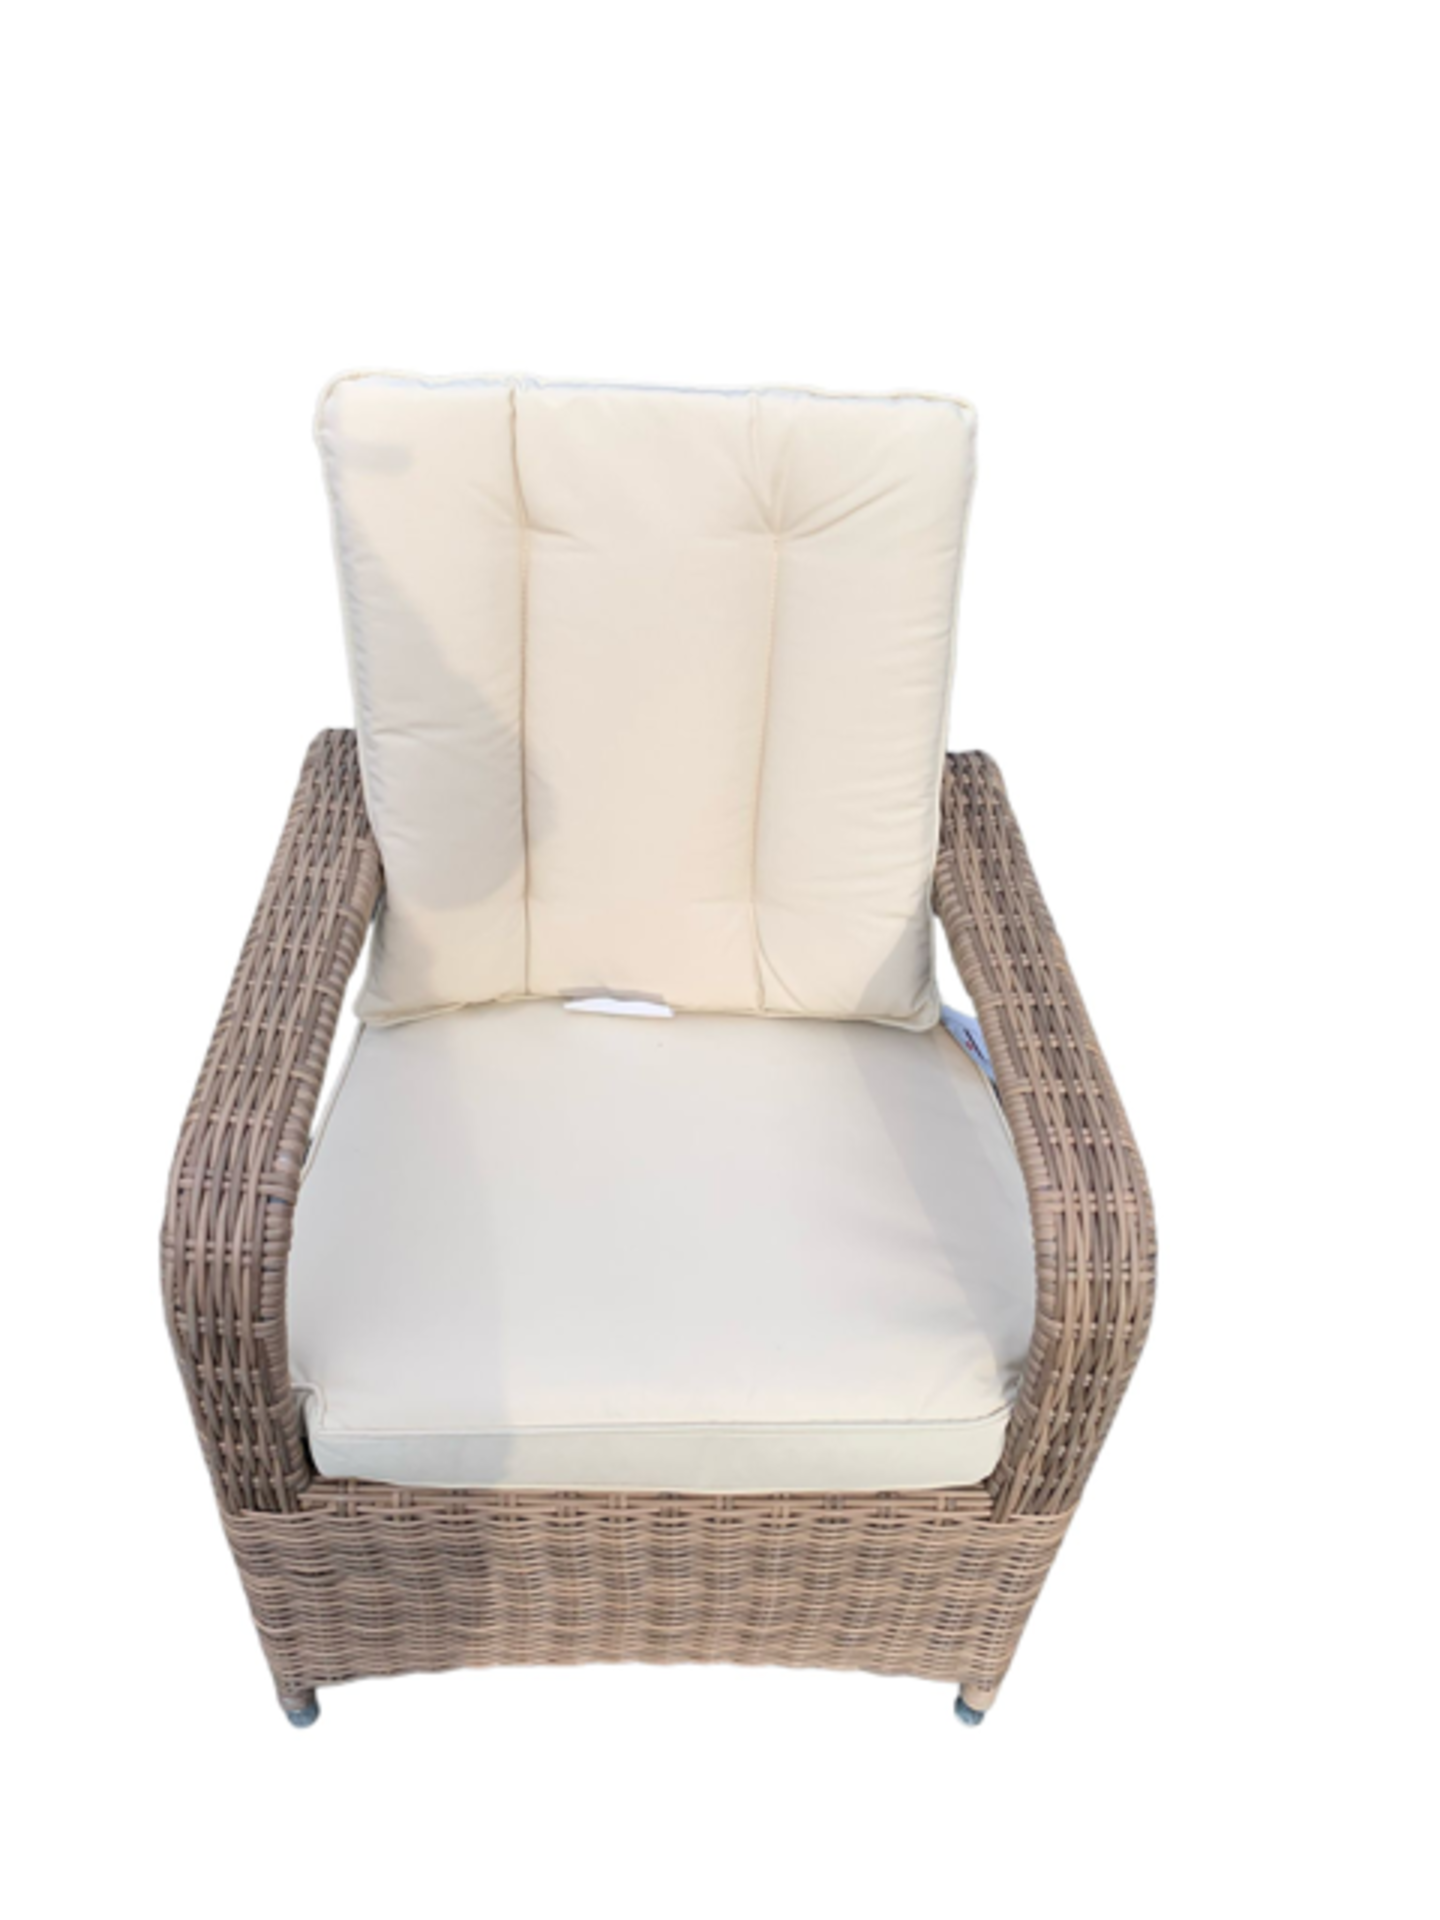 BRAND NEW 4 SEATER ROUND RATTAN DINING TABLE SET WITH ICE BUCKET AND WEATHER PROOF RAIN COVER. - Image 2 of 5